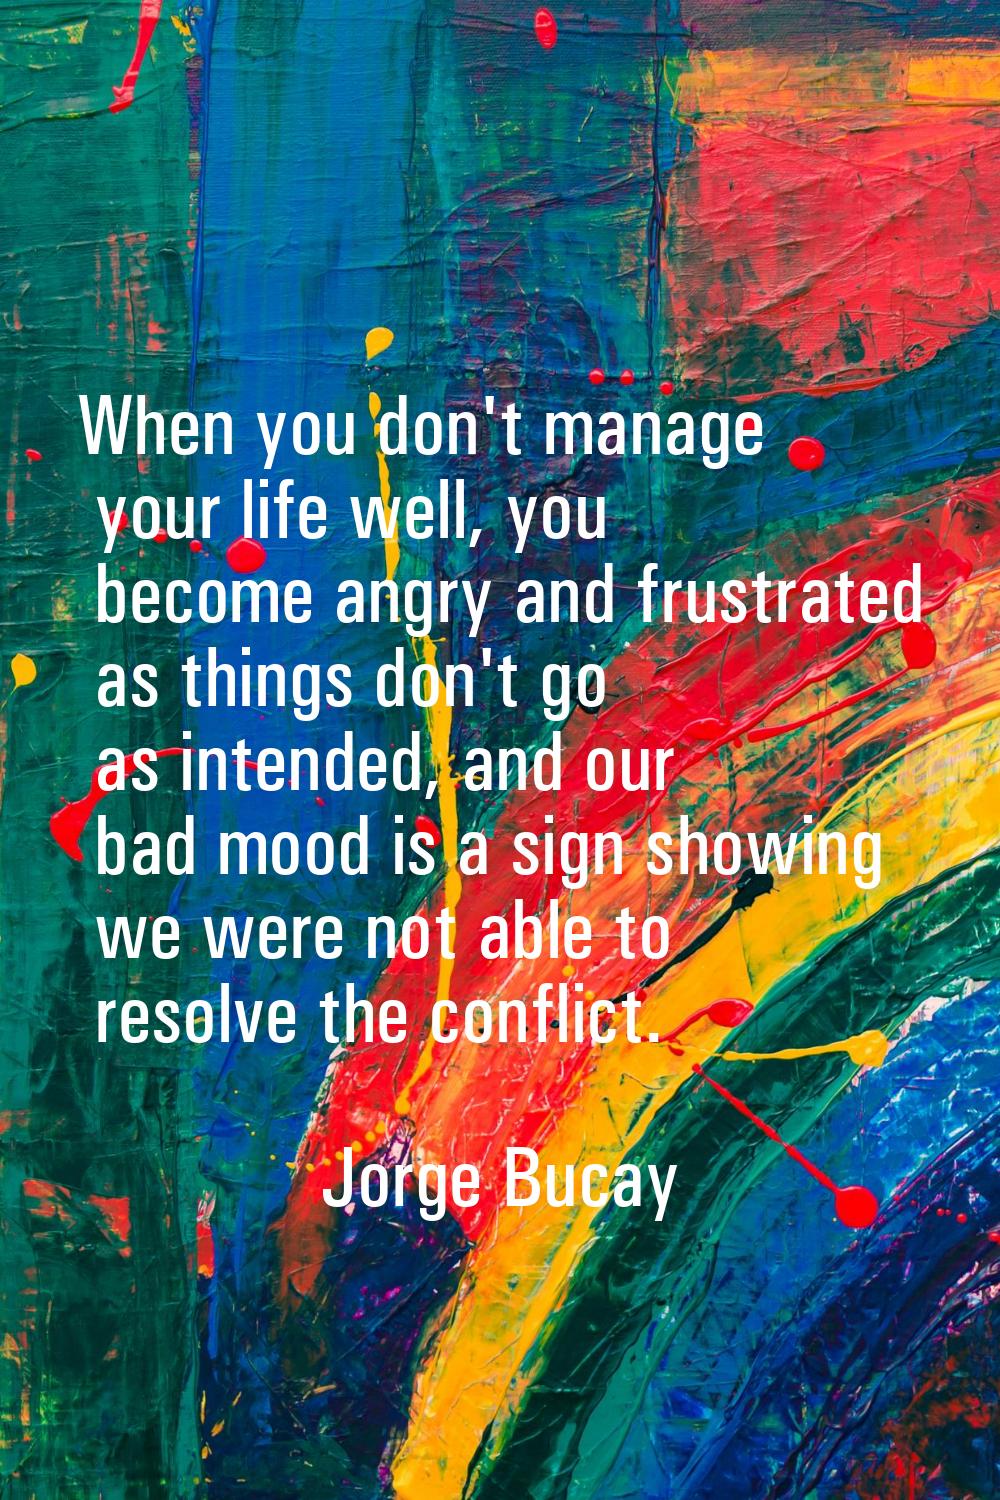 When you don't manage your life well, you become angry and frustrated as things don't go as intende